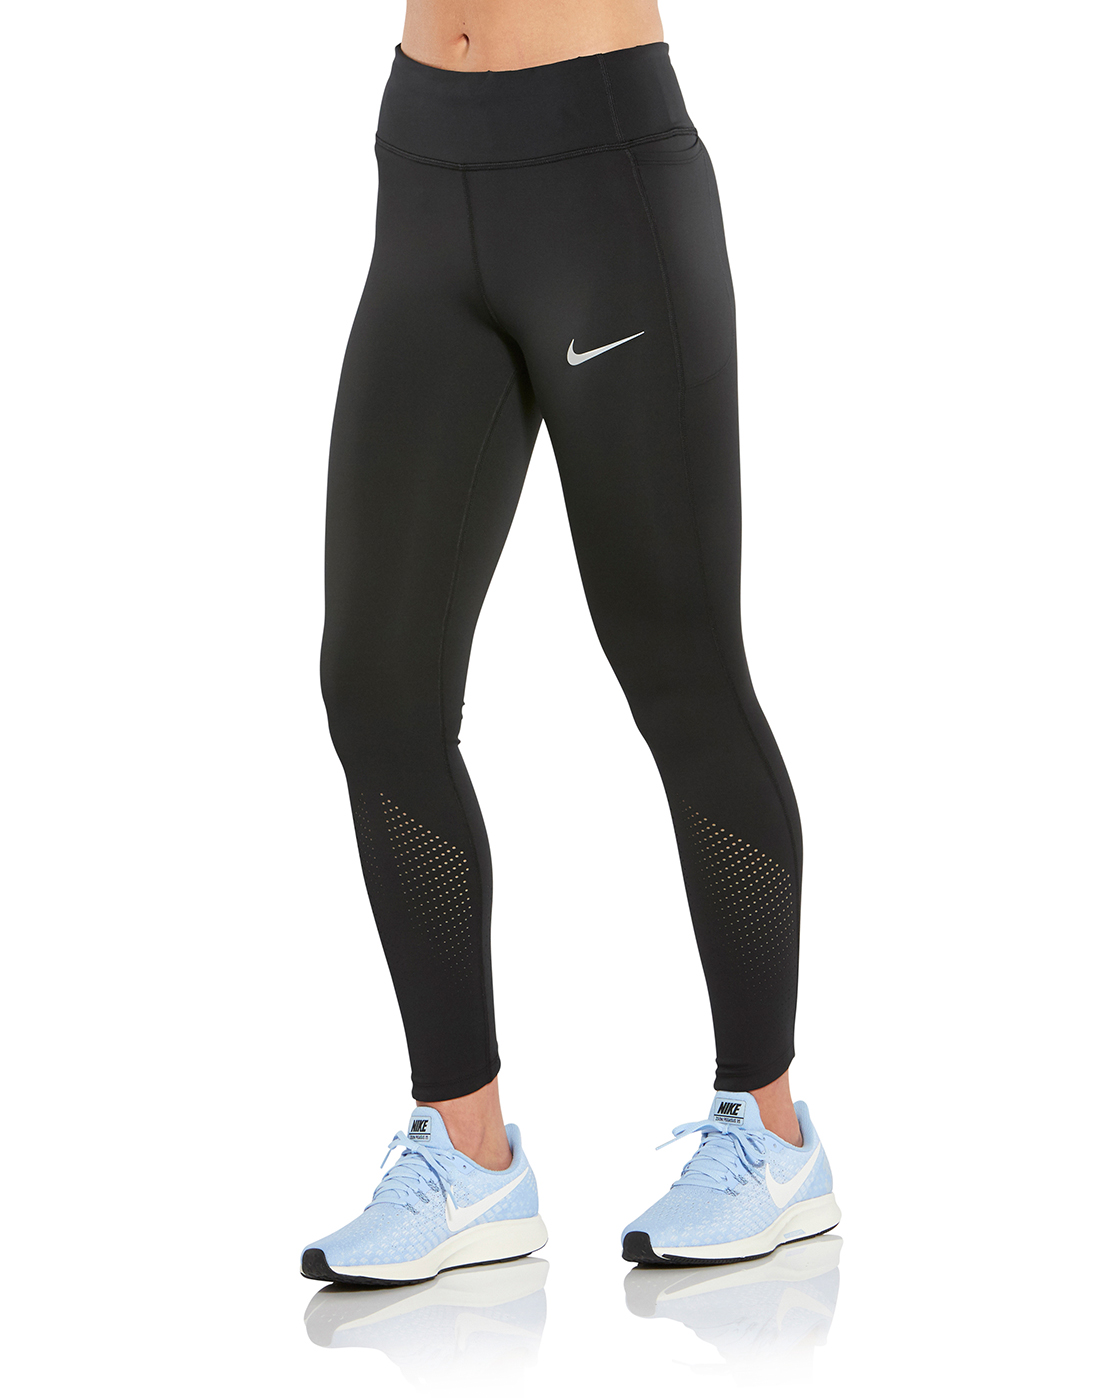 women's running tights nike epic lux